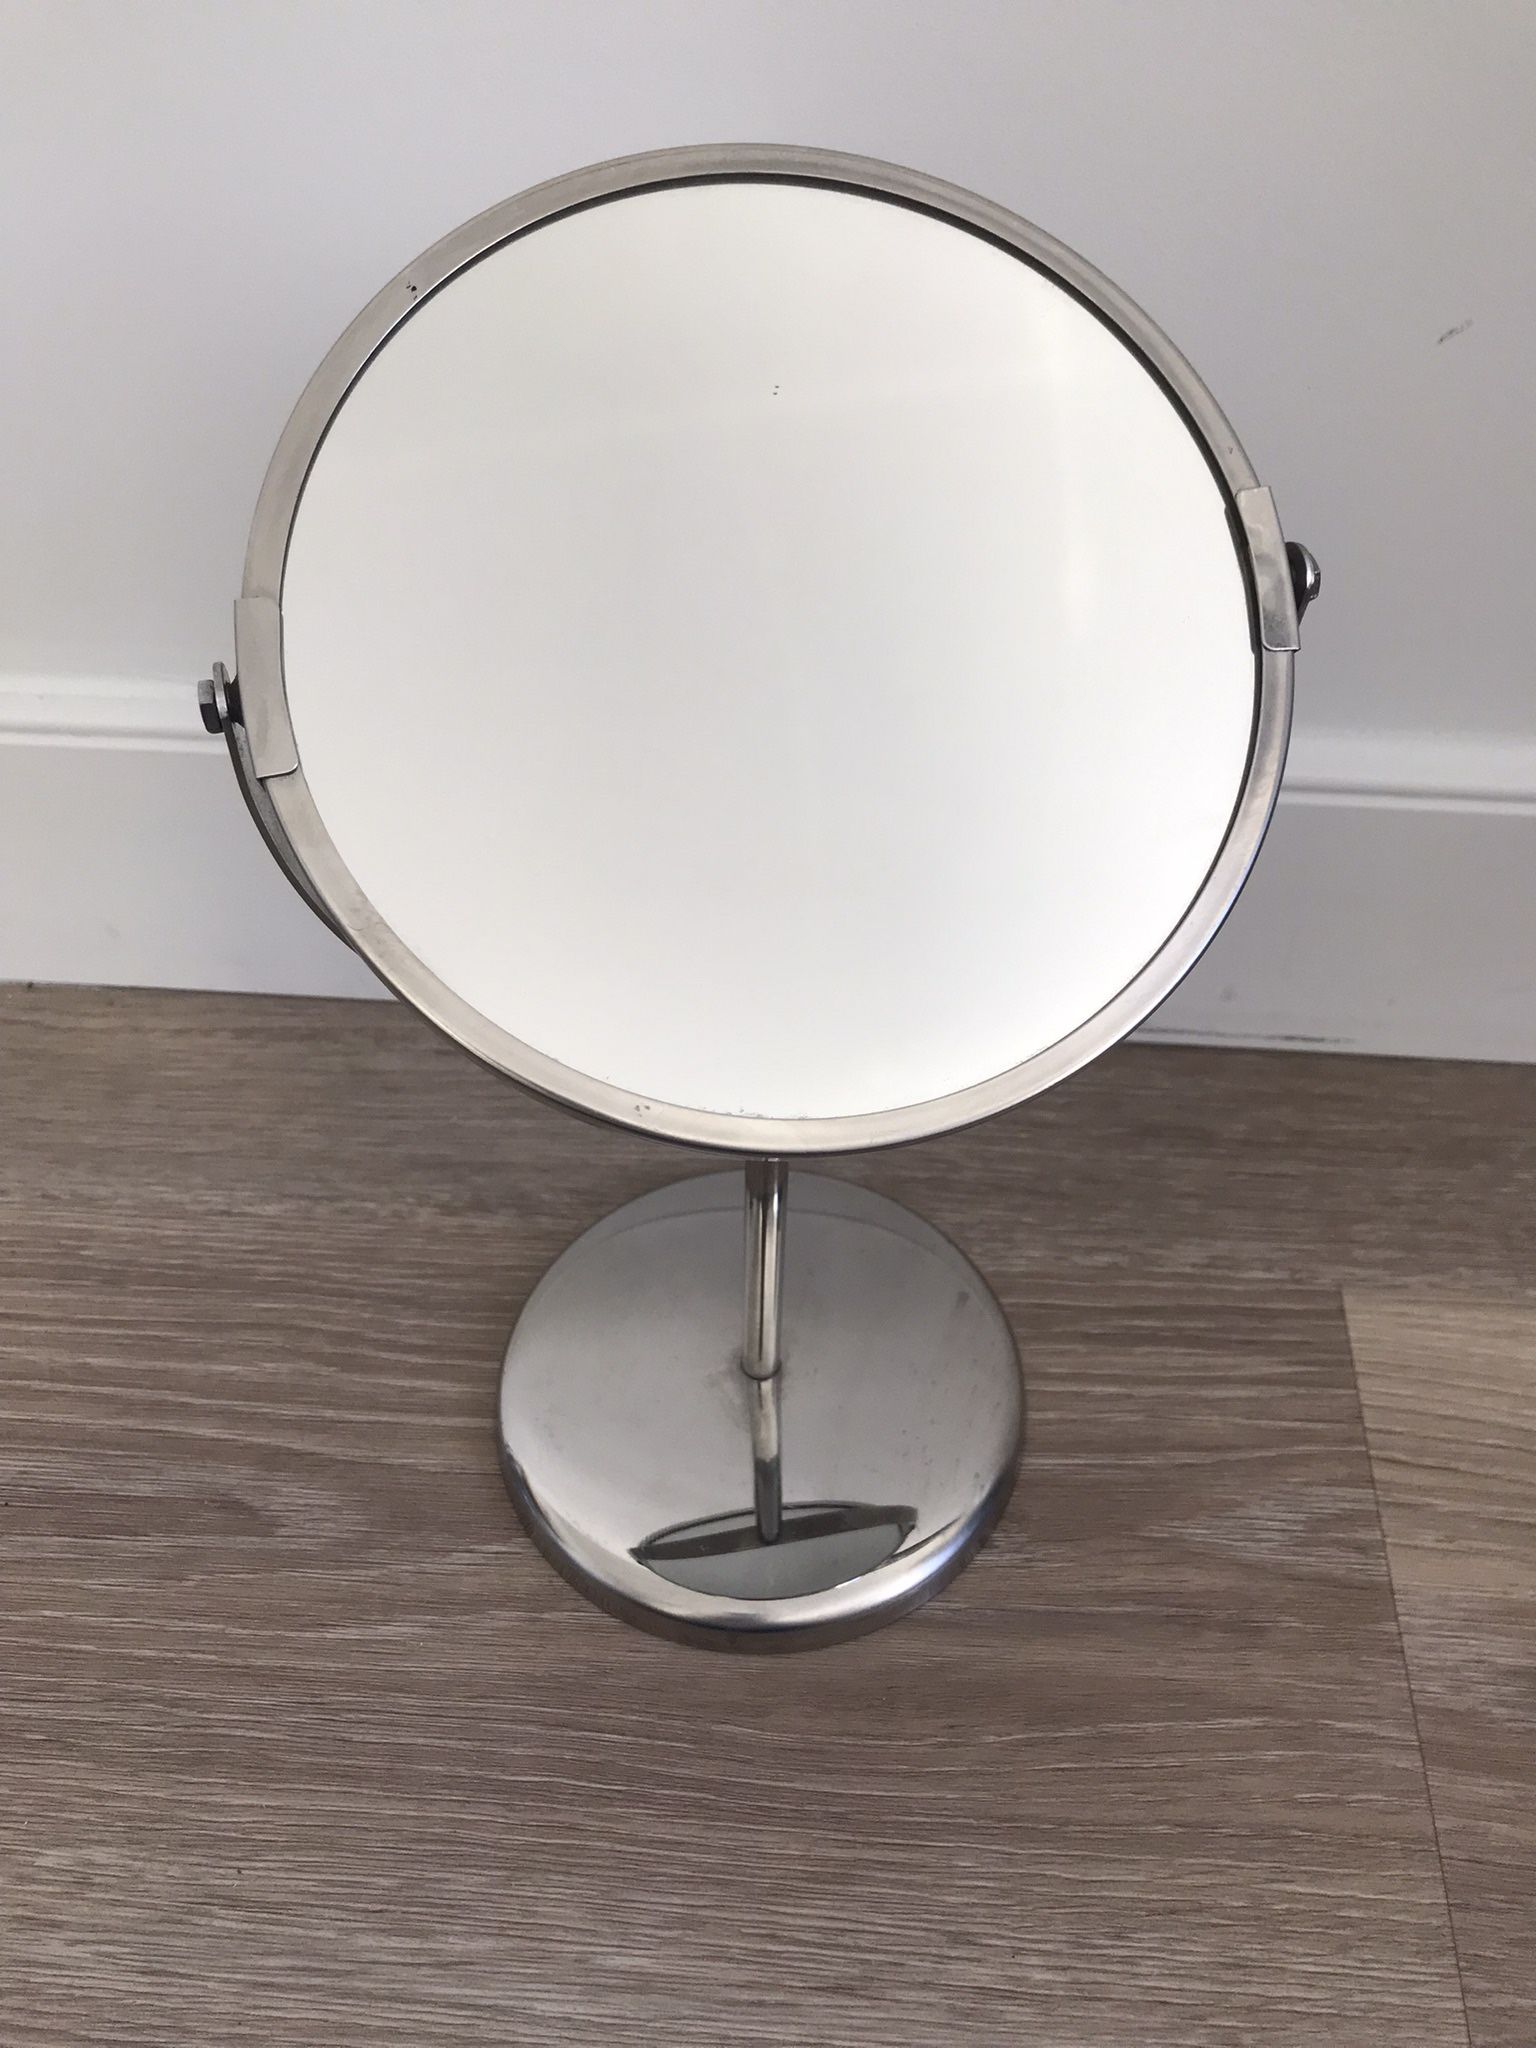 Double sided mirror for makeup vanity magnifying swivel silver steel chrome 